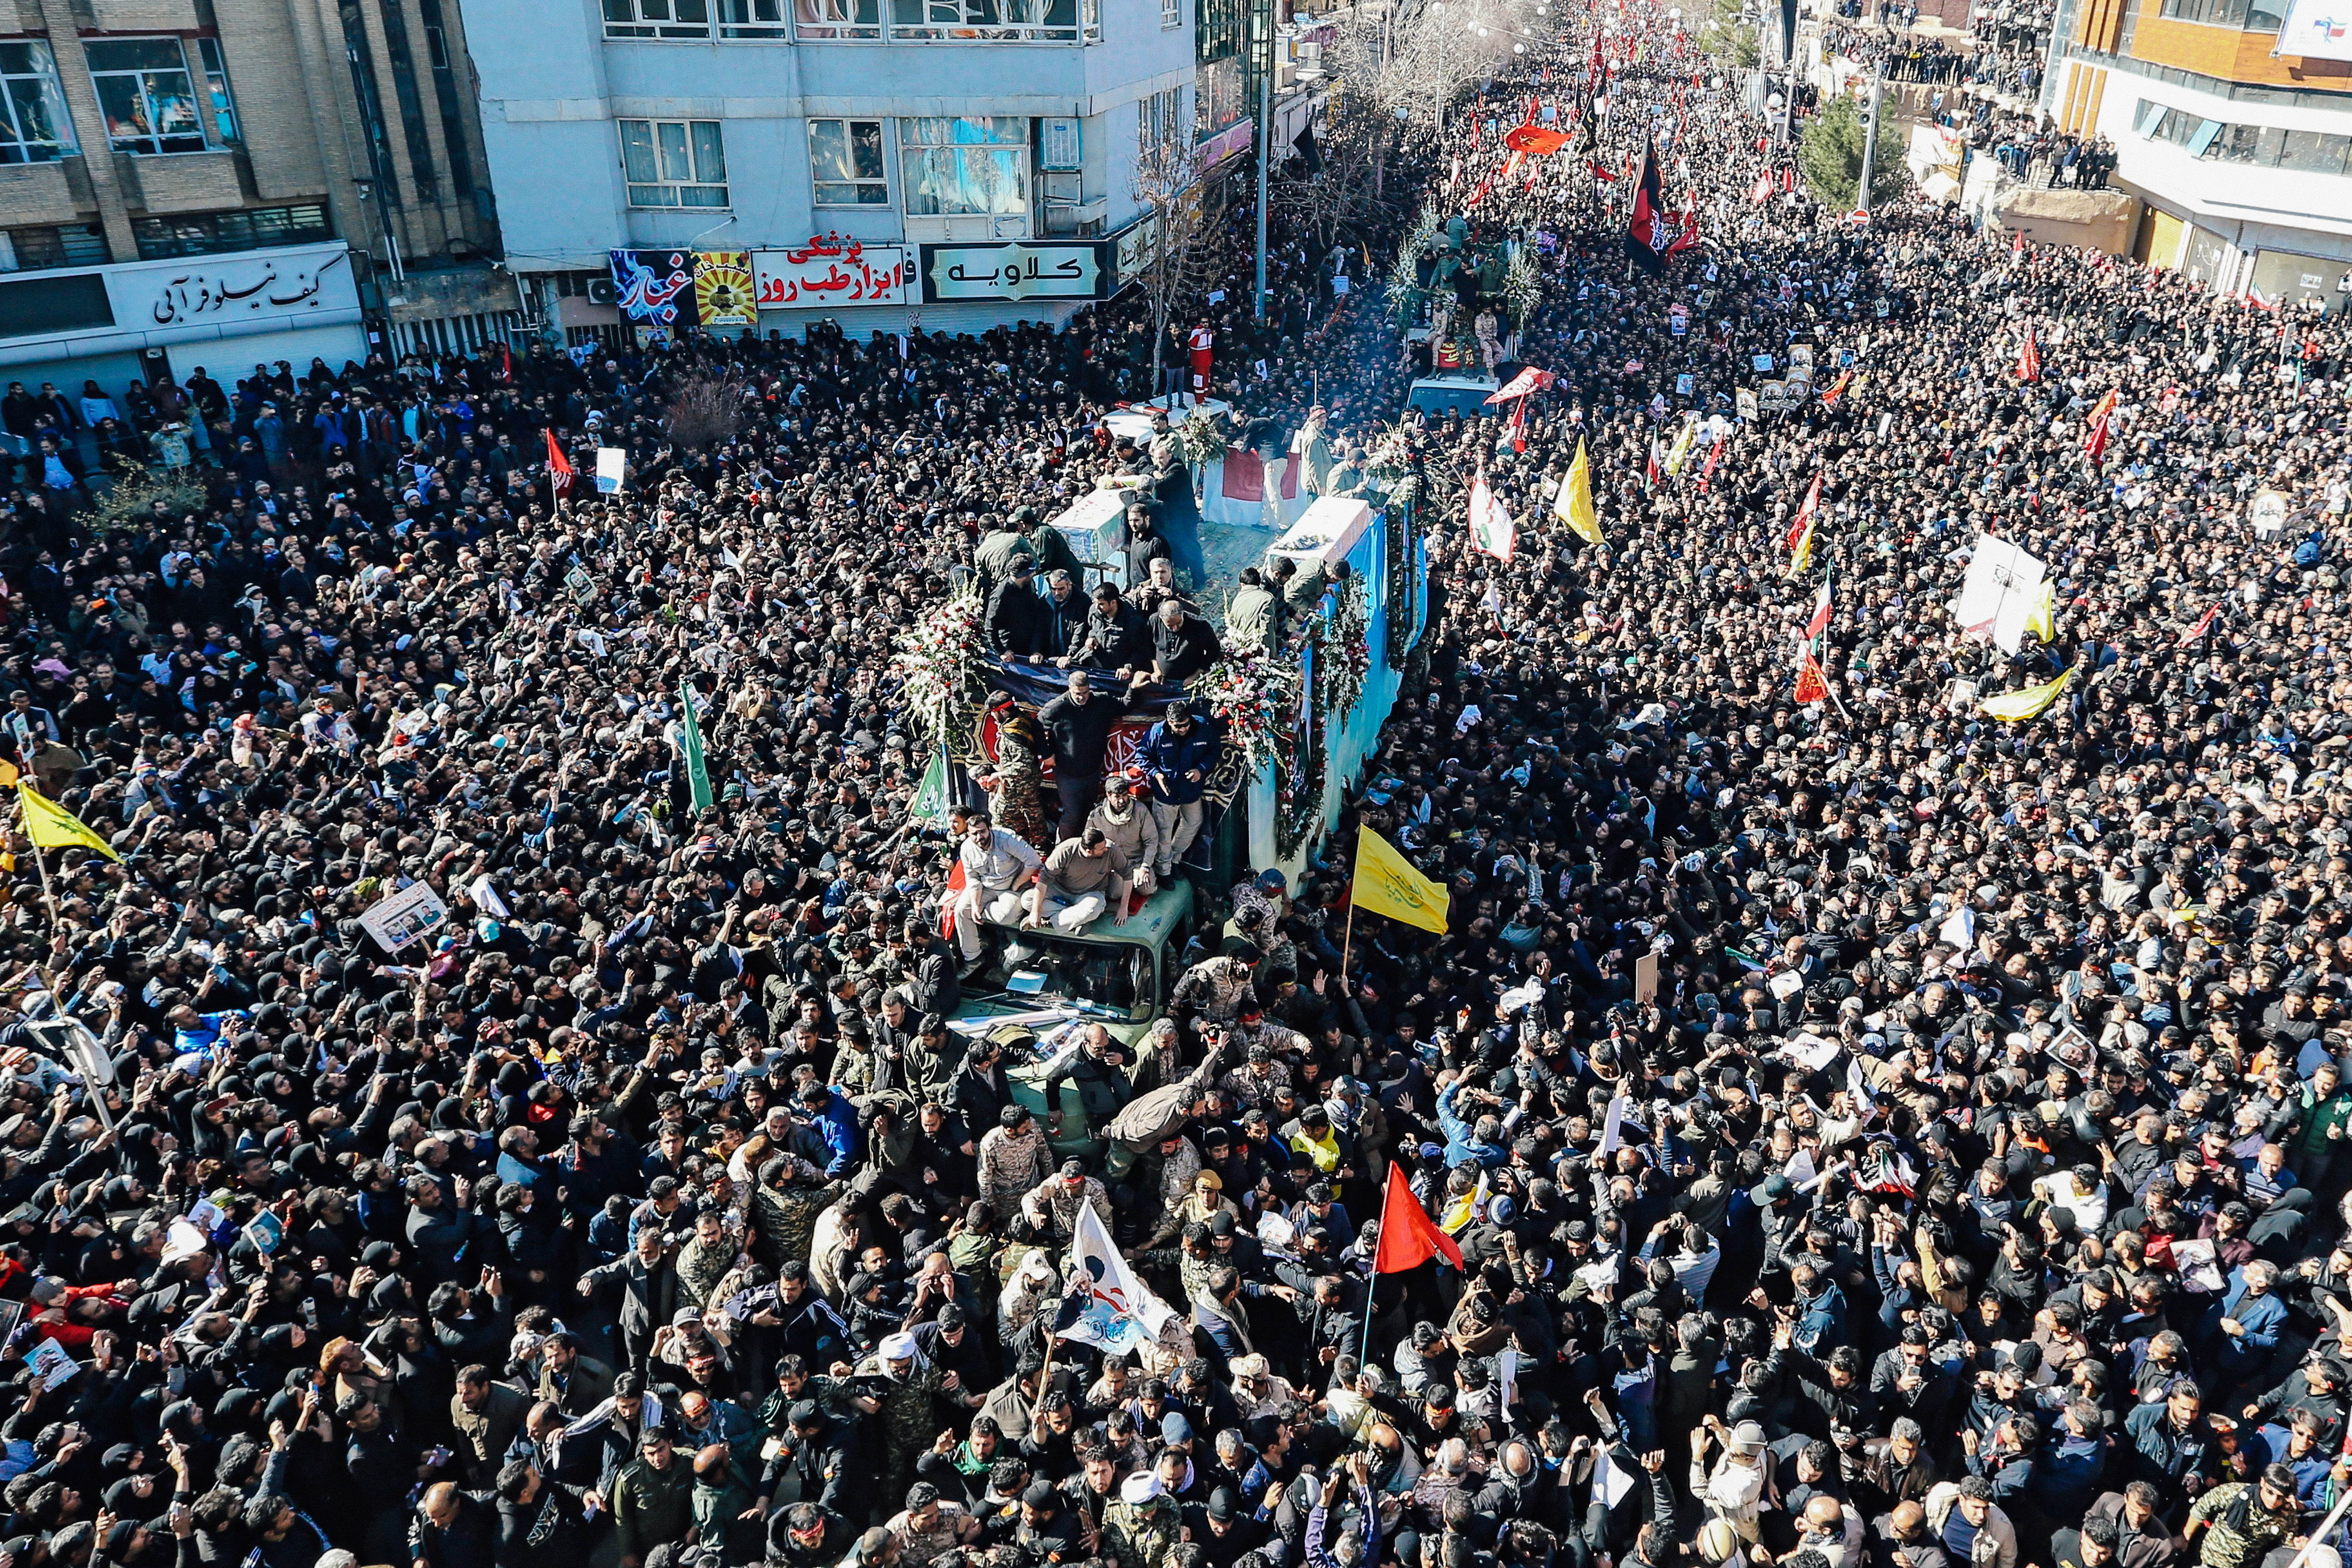 A mass of people in a city square with a vehicle in the middle.